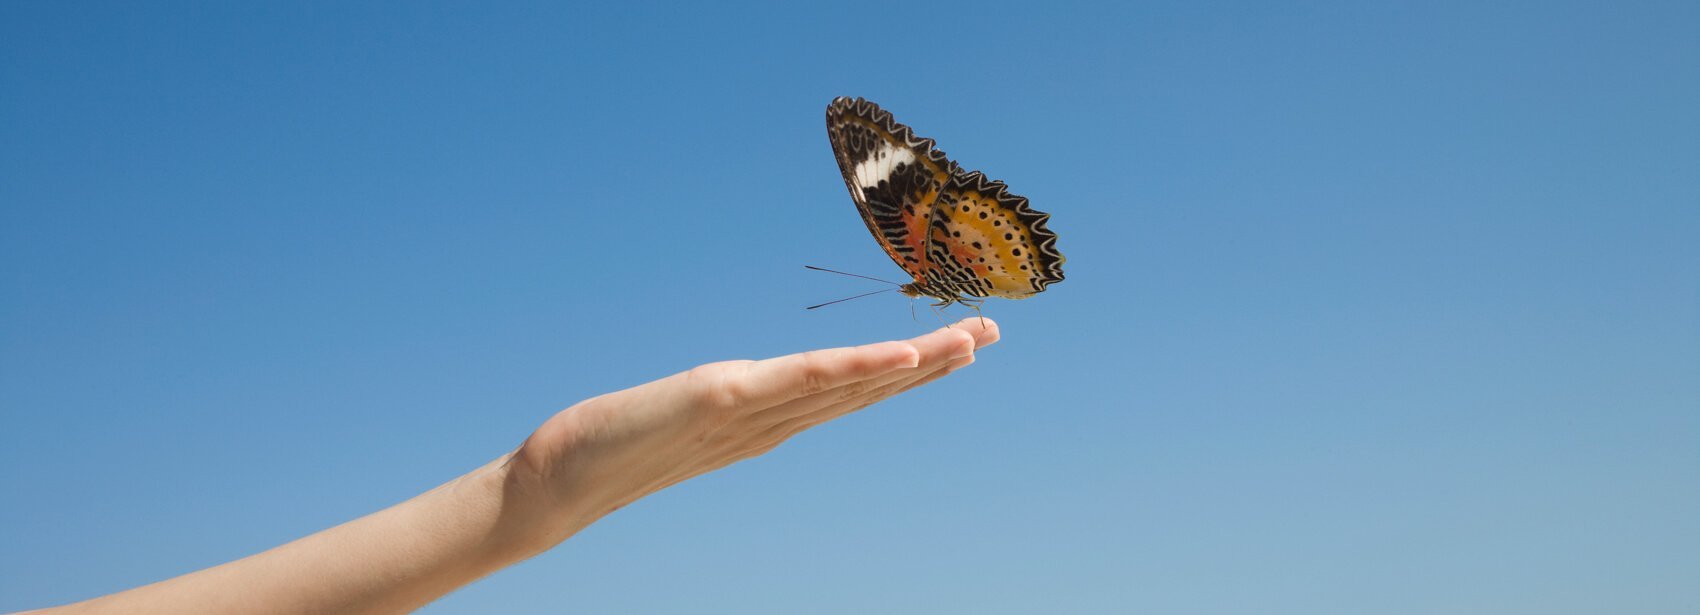 A hand reaching out to a butterfly